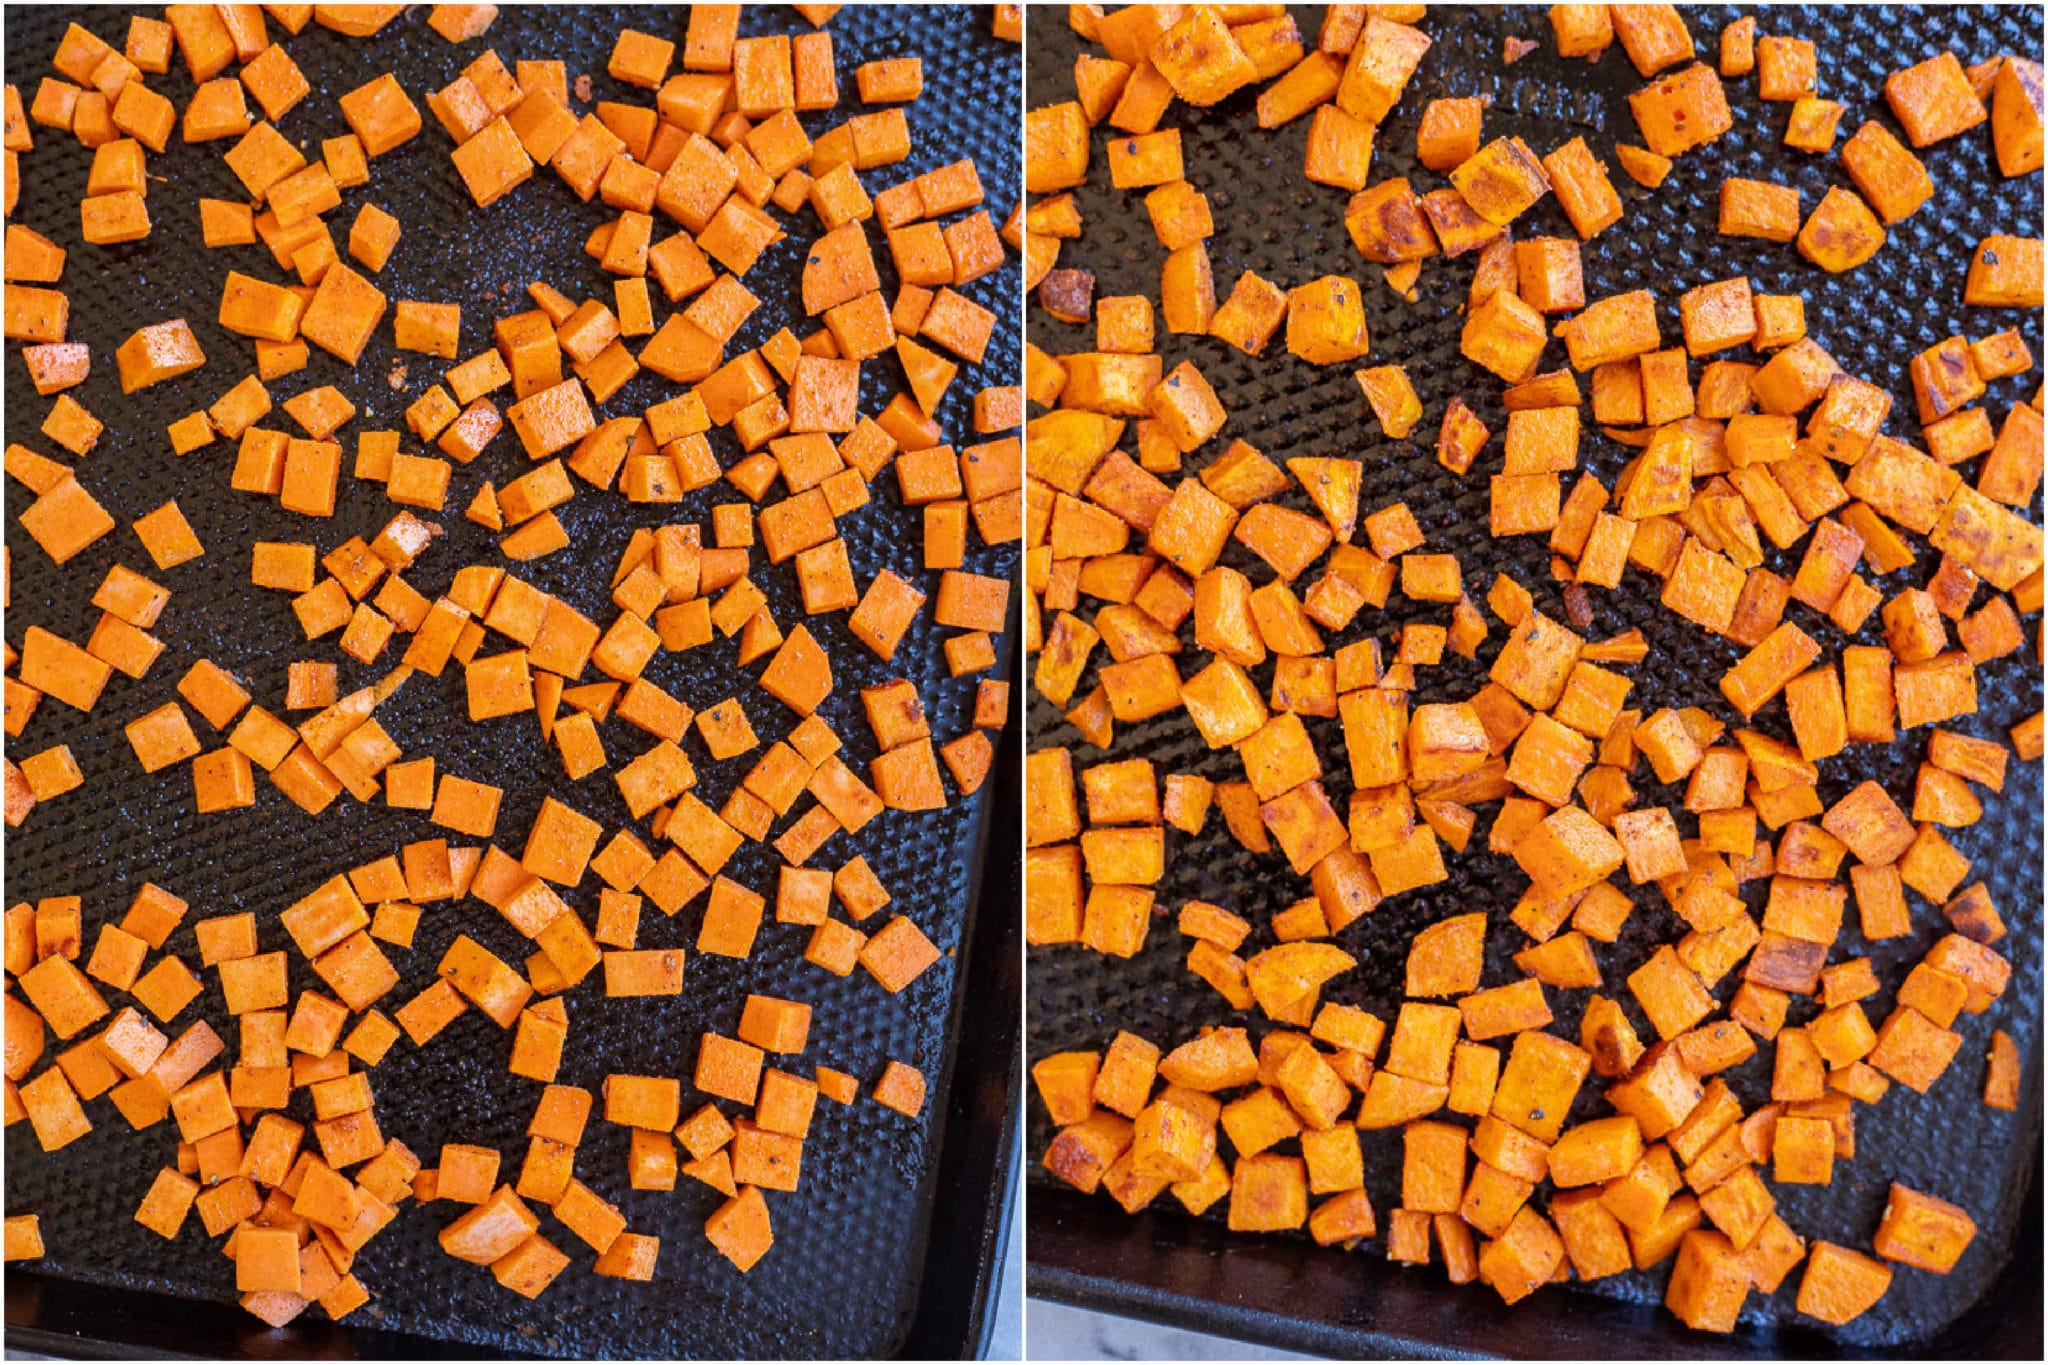 diced sweet potato before and after it's been roasted